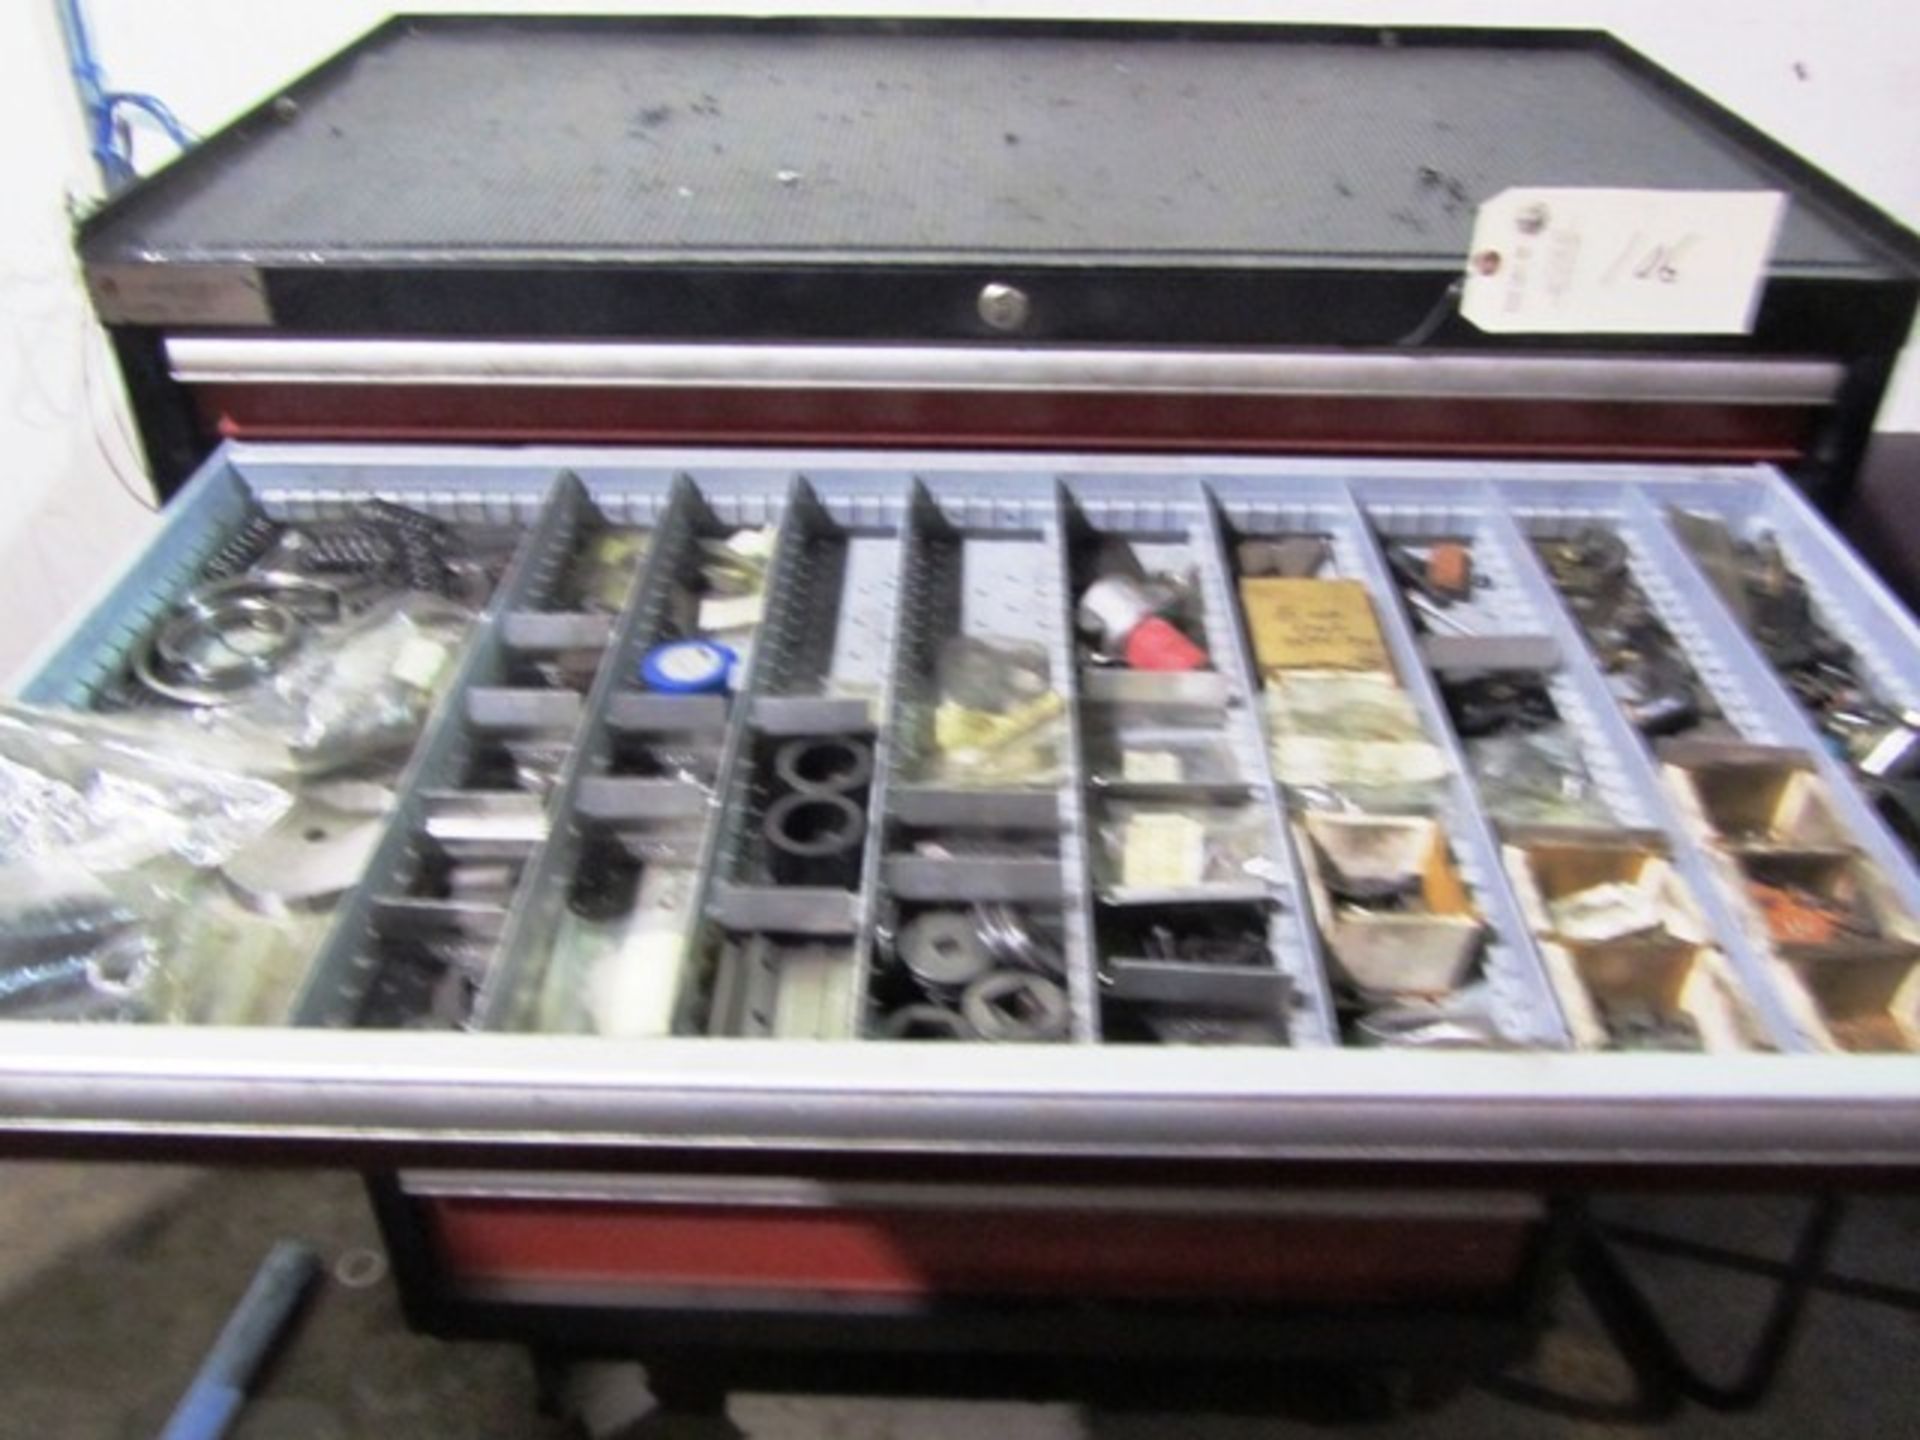 Amada 8 Drawer Portable Tool Cabinet with Punches & Dies - Image 3 of 7